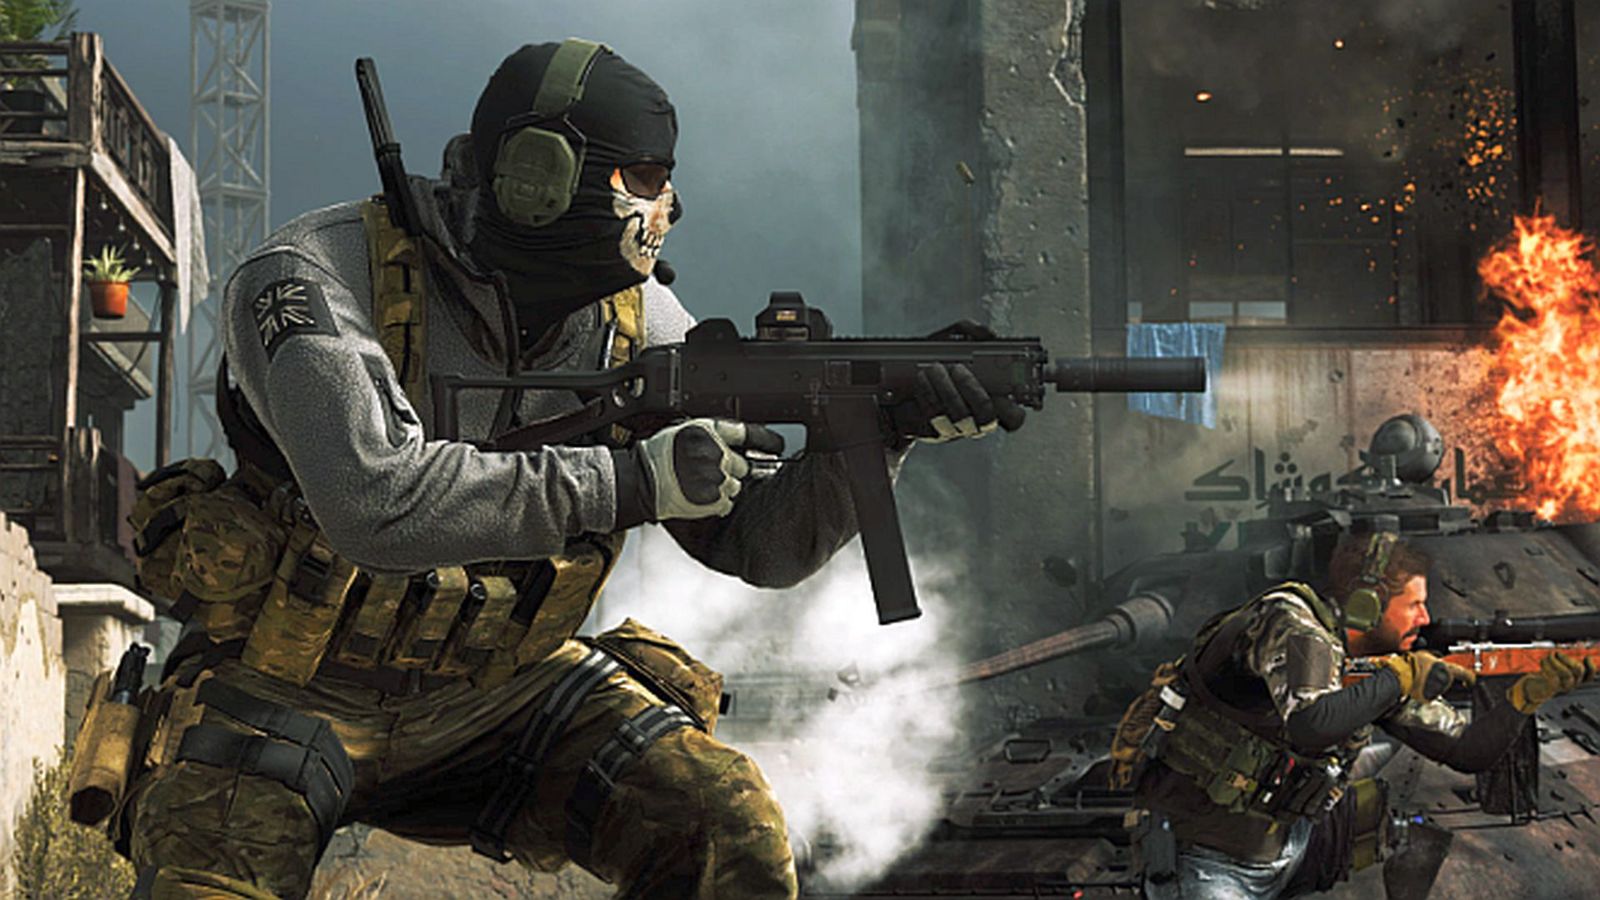 Image showing Ghost holding Modern Warfare SMG